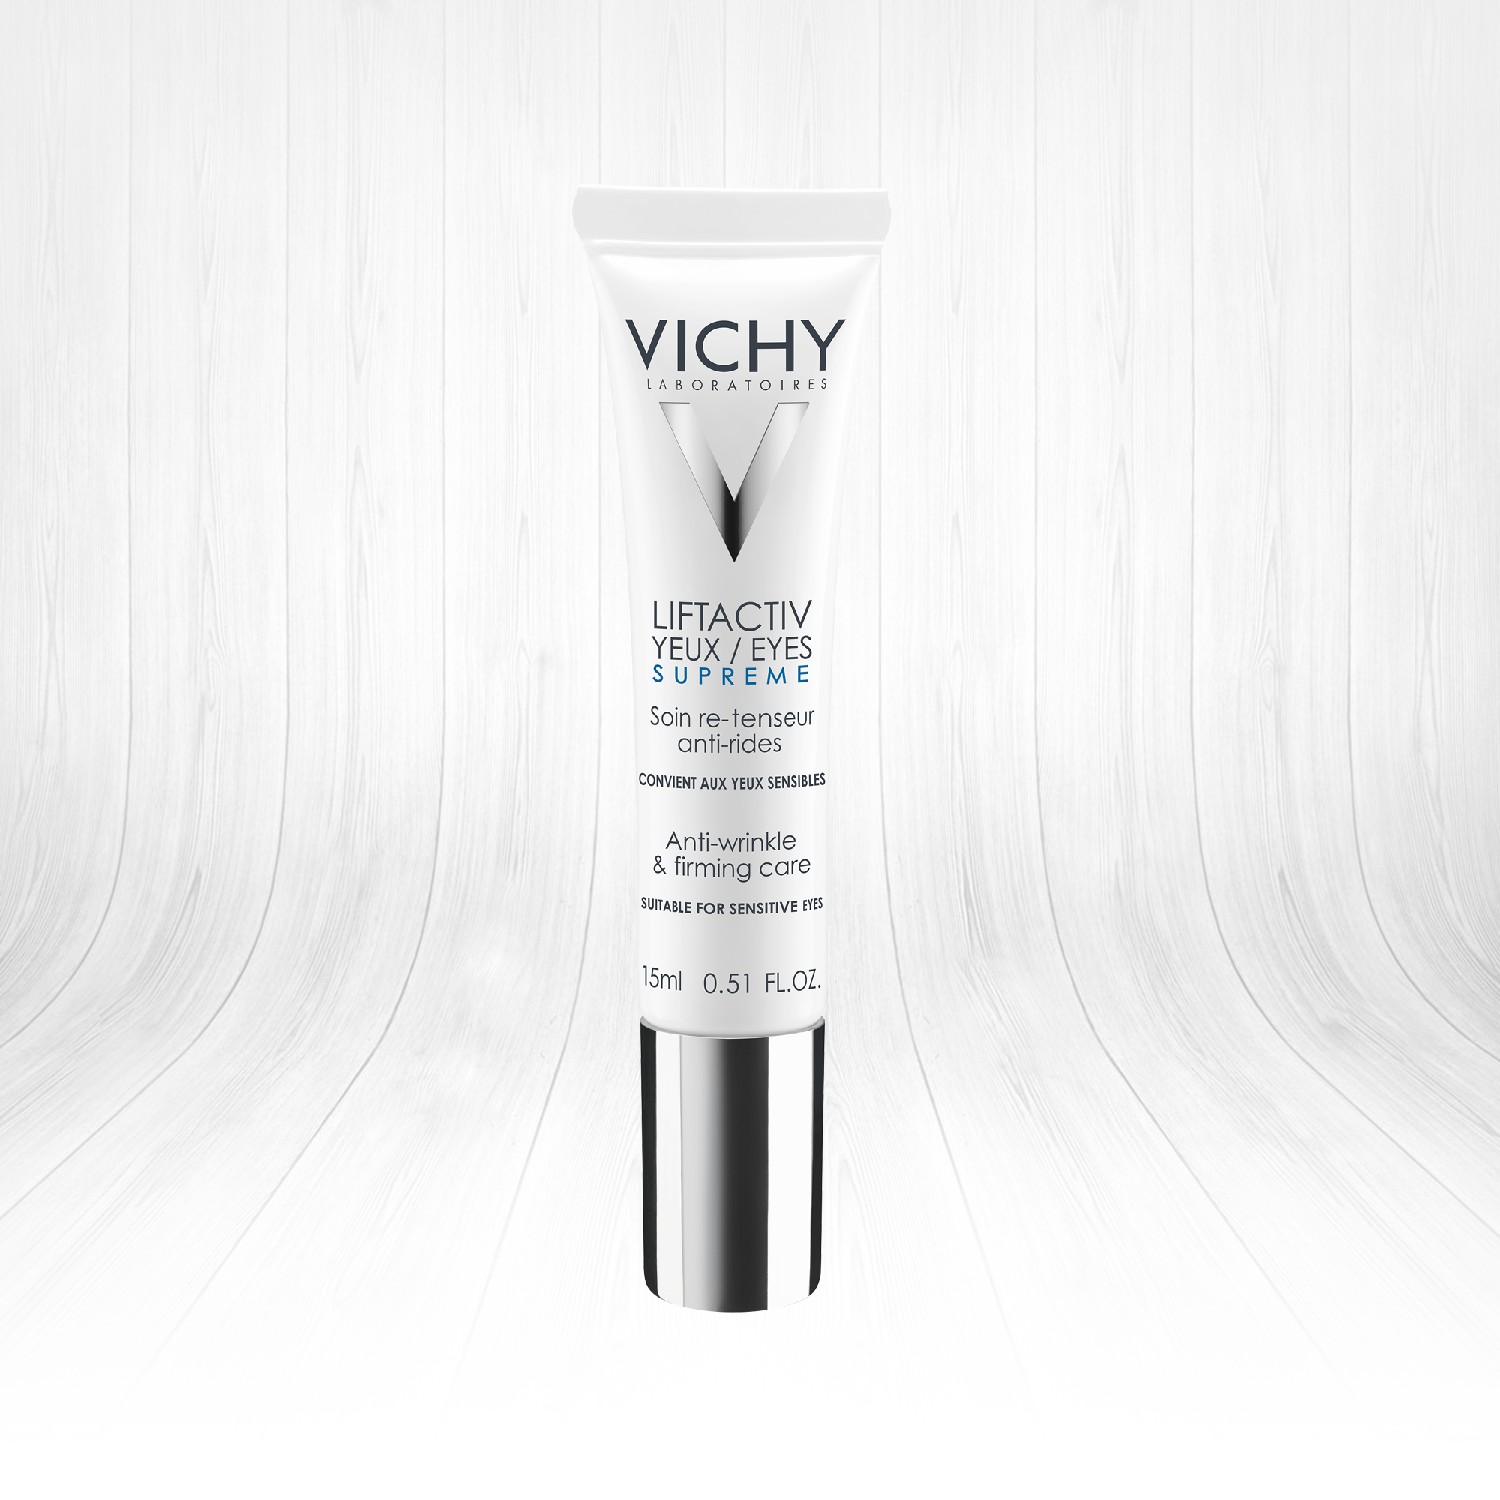 Vichy Liftactiv Eyes AntiWrinkle &Firming Care